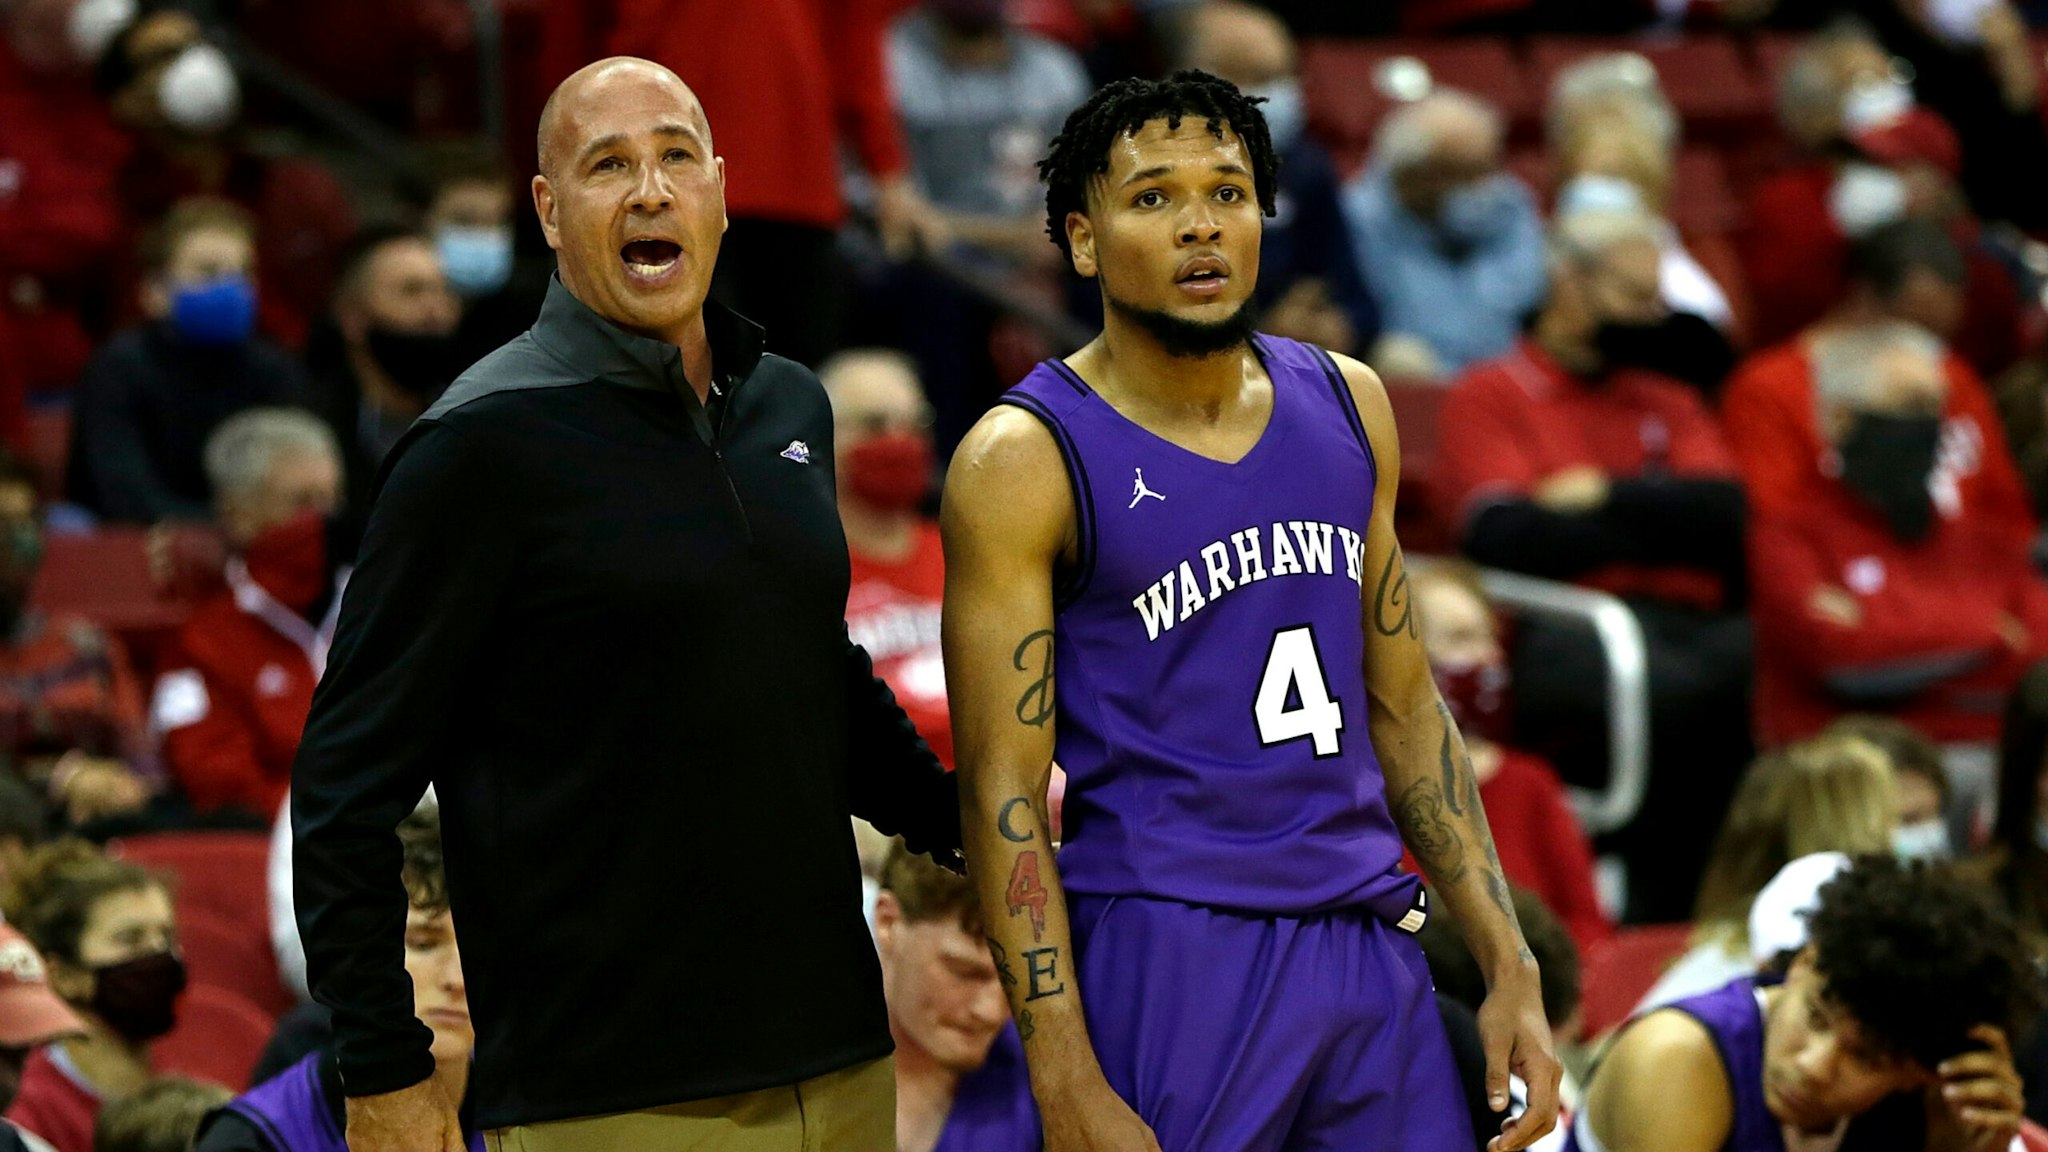 MADISON, WISCONSIN - OCTOBER 29: UW-Whitewater head coach Pat Miller and Derek Gray #4 look on in the first half against the Wisconsin Badgers during the exhibition game at Kohl Center on October 29, 2021 in Madison, Wisconsin.